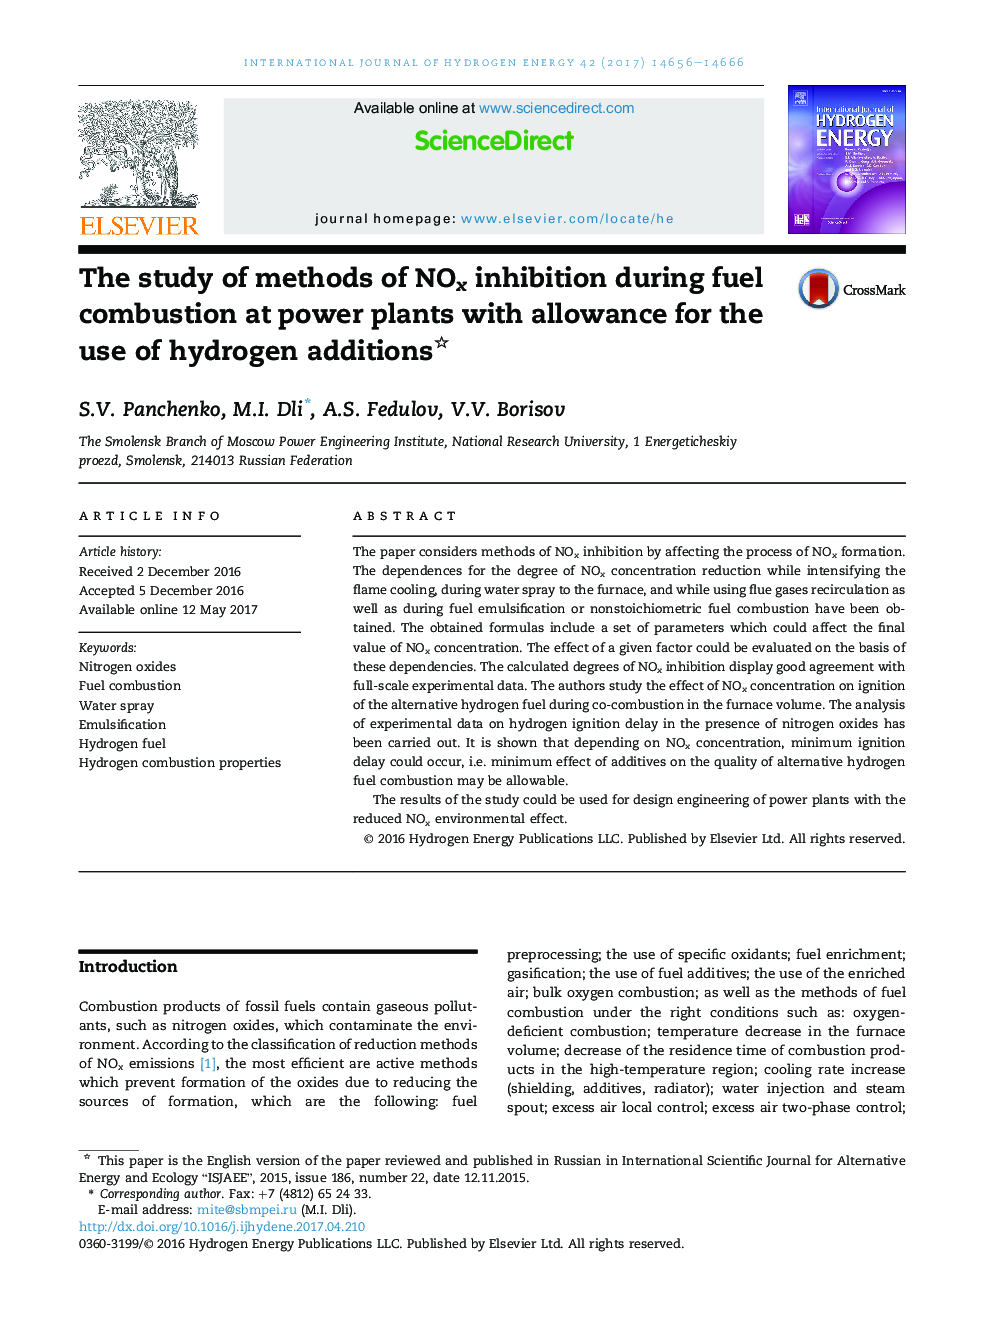 The study of methods of NOx inhibition during fuel combustion at power plants with allowance for the use of hydrogen additions